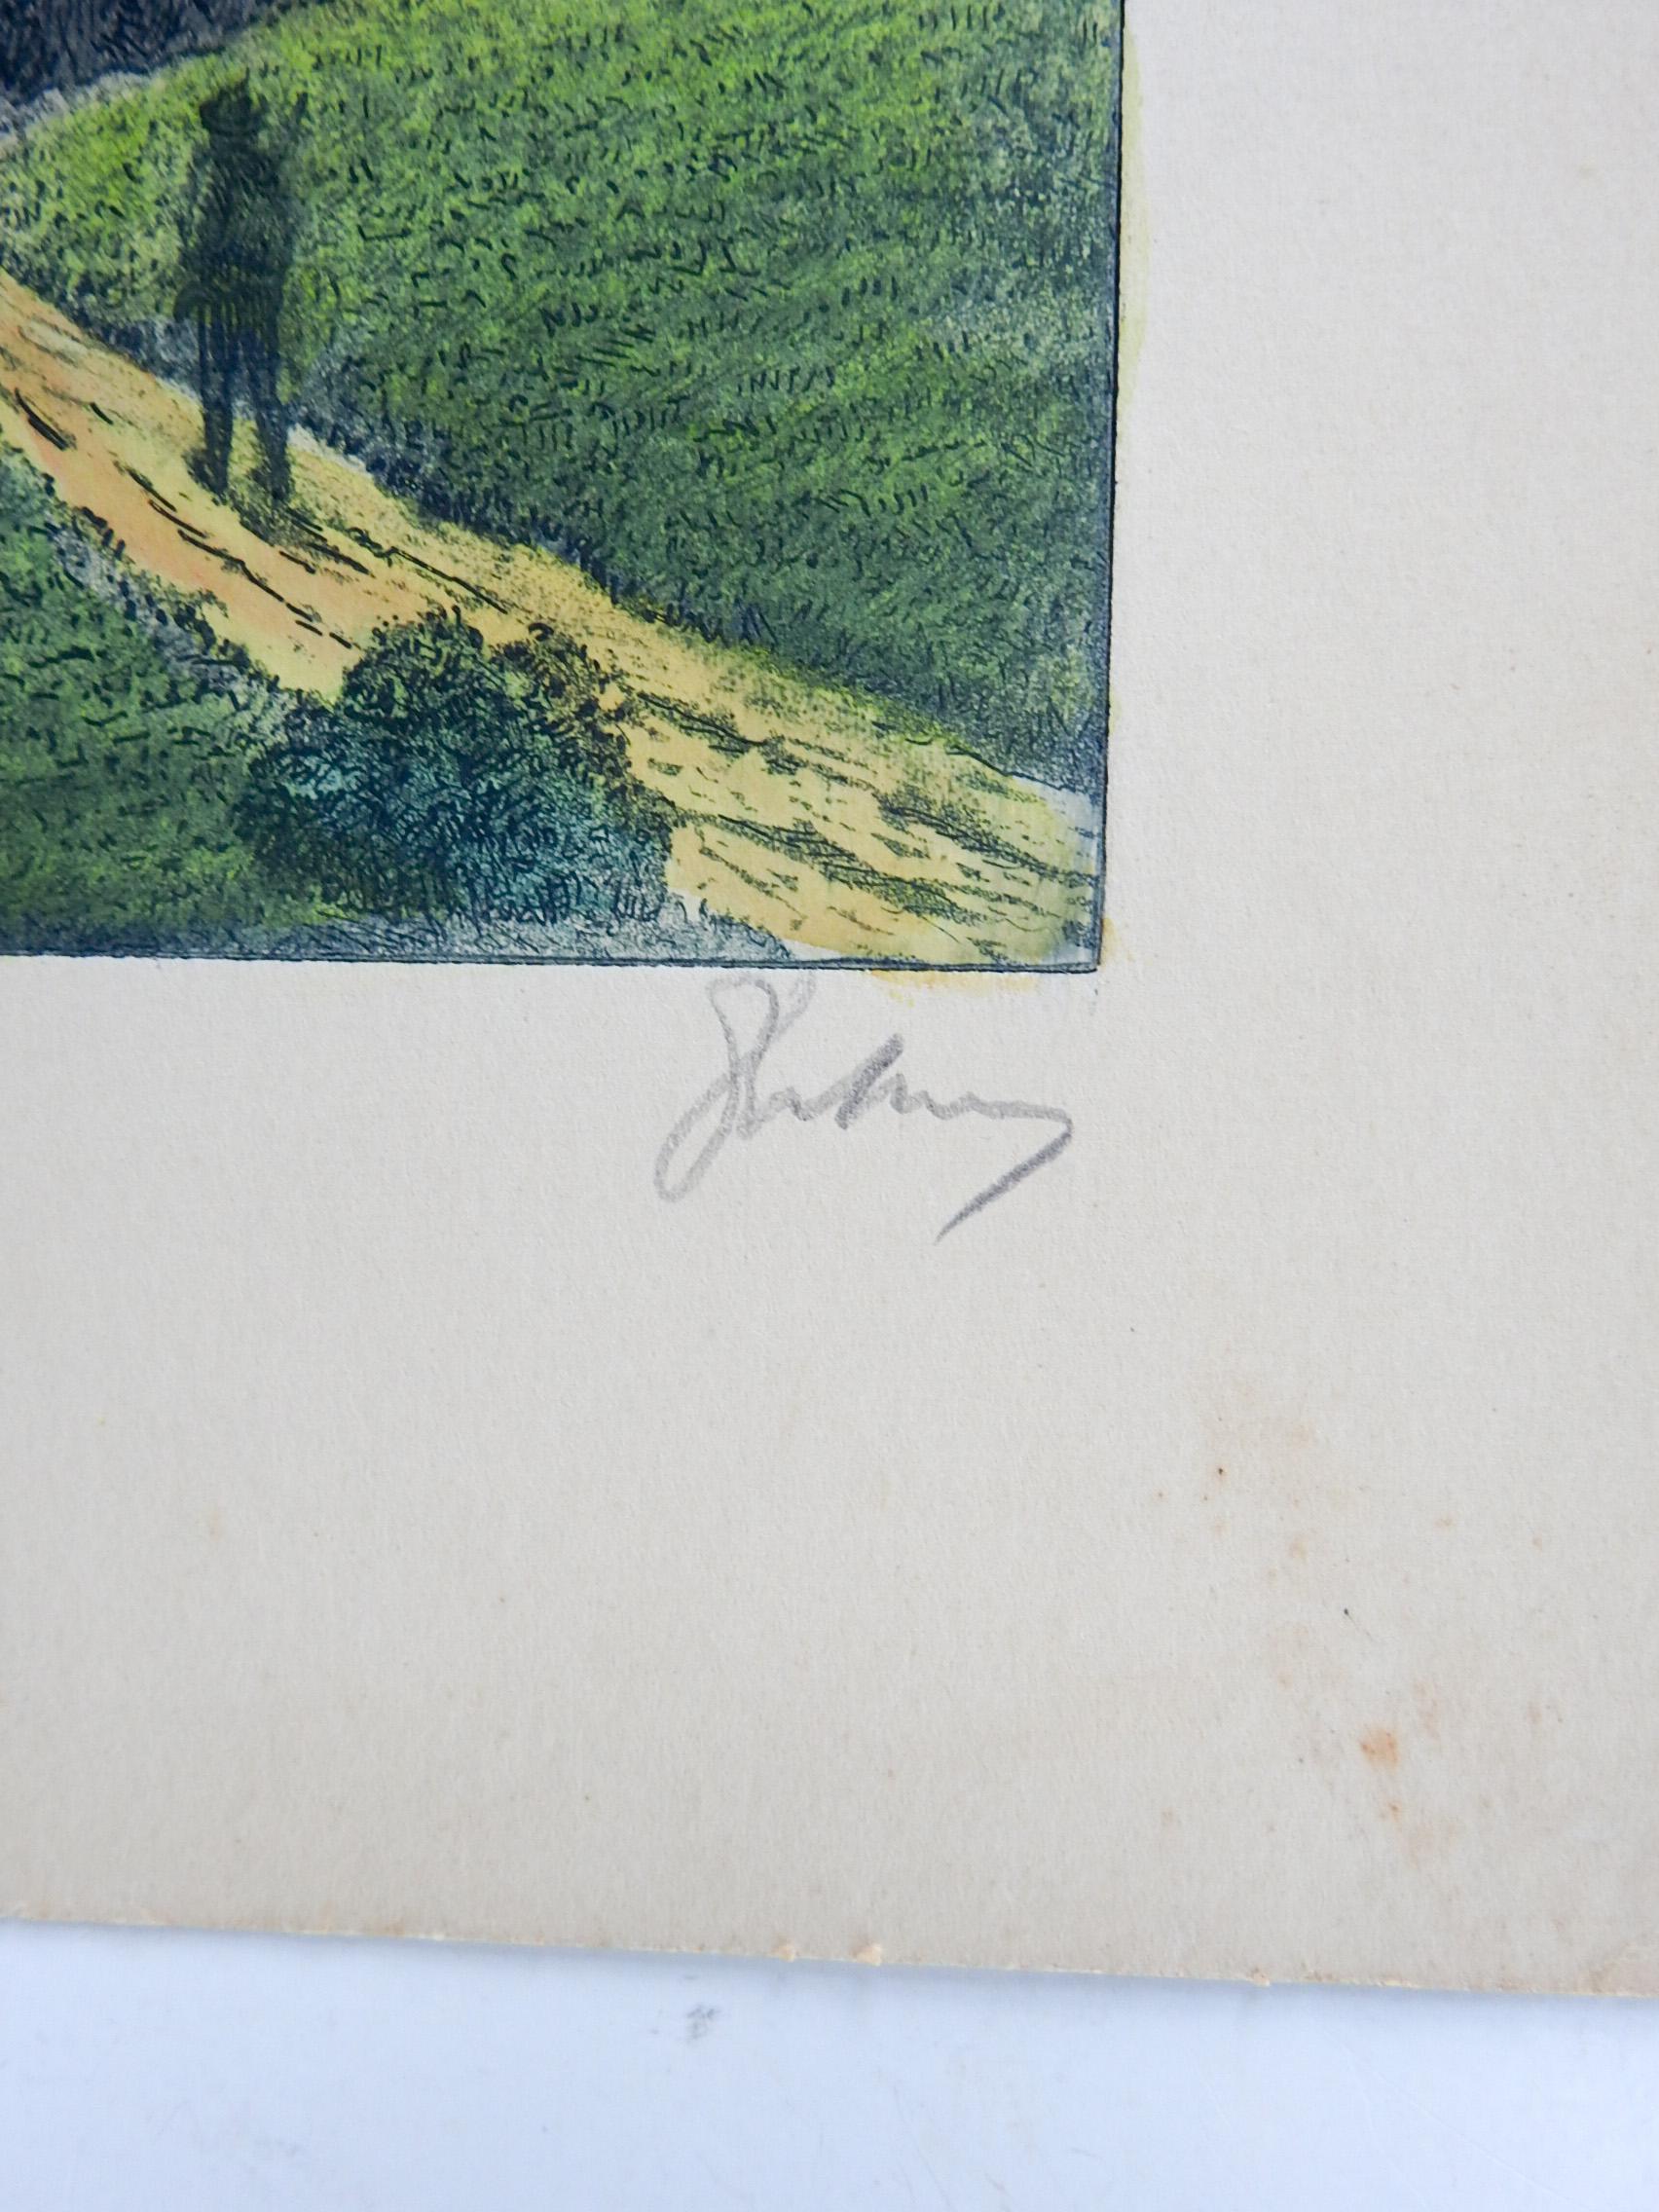 Vintage early 20th century color etching on paper of mountain landscape and hiker By Richard Pokorney (1907-1997) Austria. Signed in pencil lower right margin. Original gallery tag pasted to upper right corner. Unframed, image size 5.5